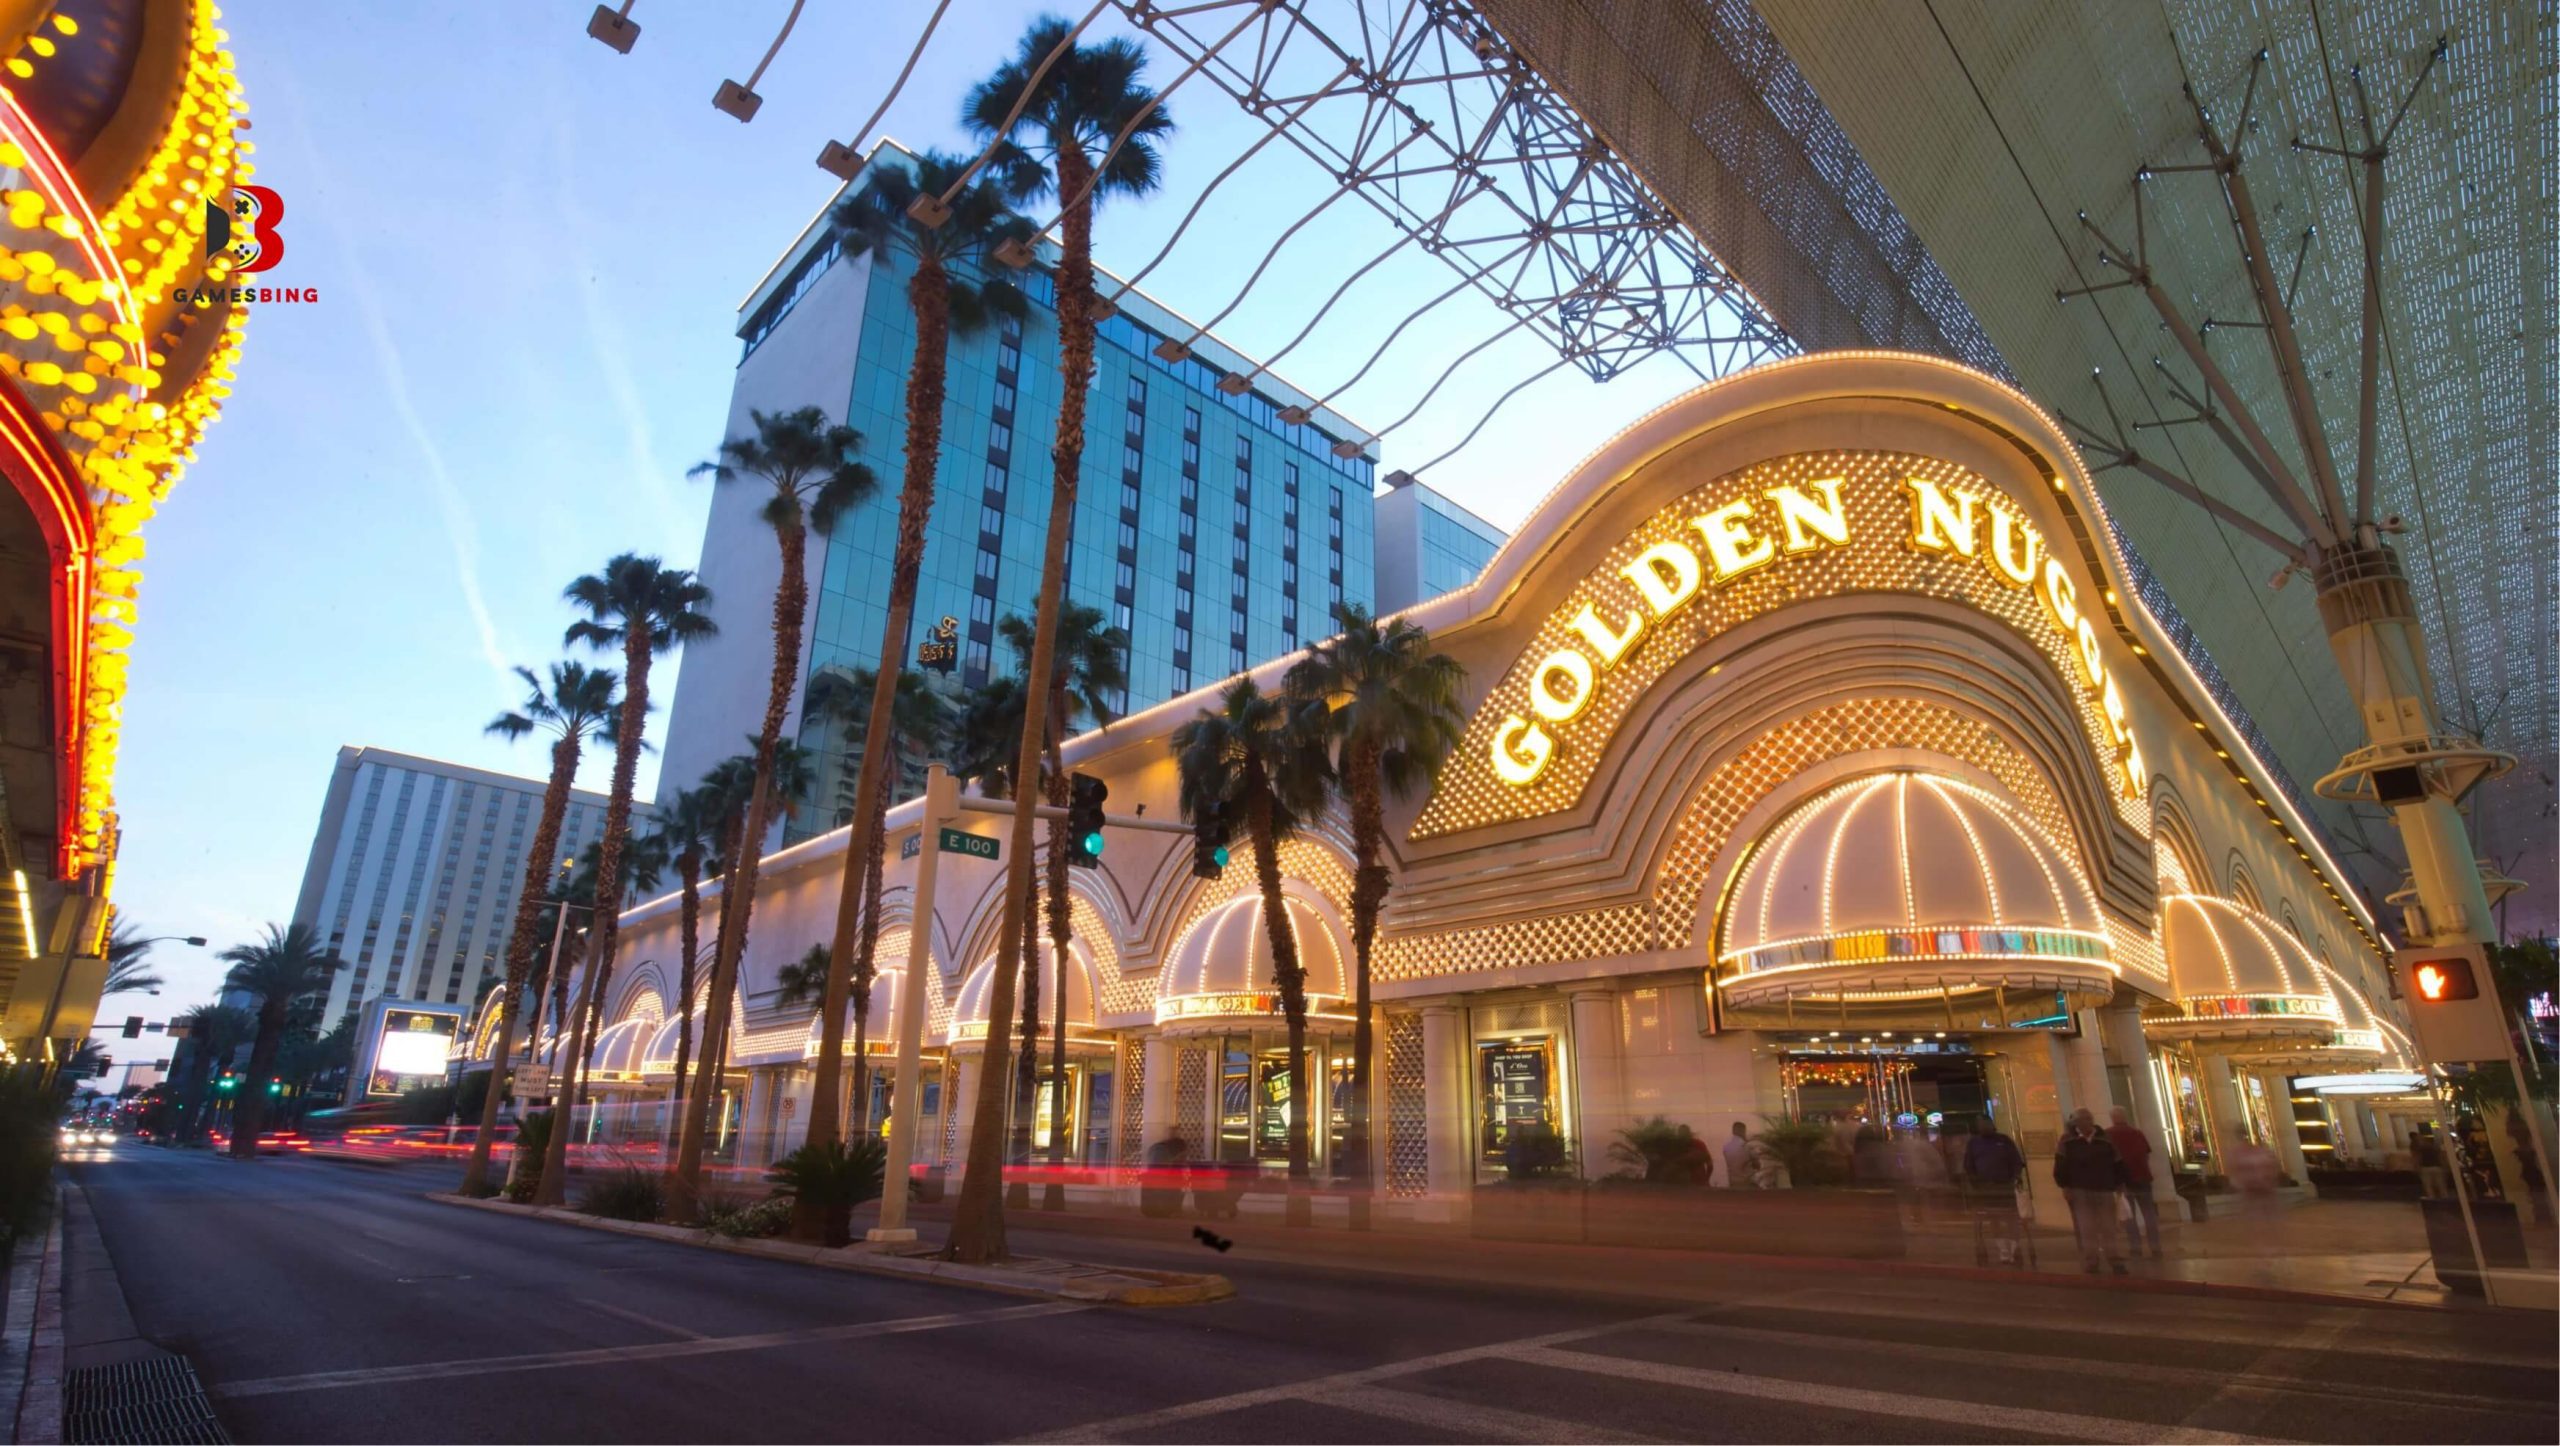 Exploring the Golden Nugget Las Vegas in the Heart of Sin City, Fremont Street